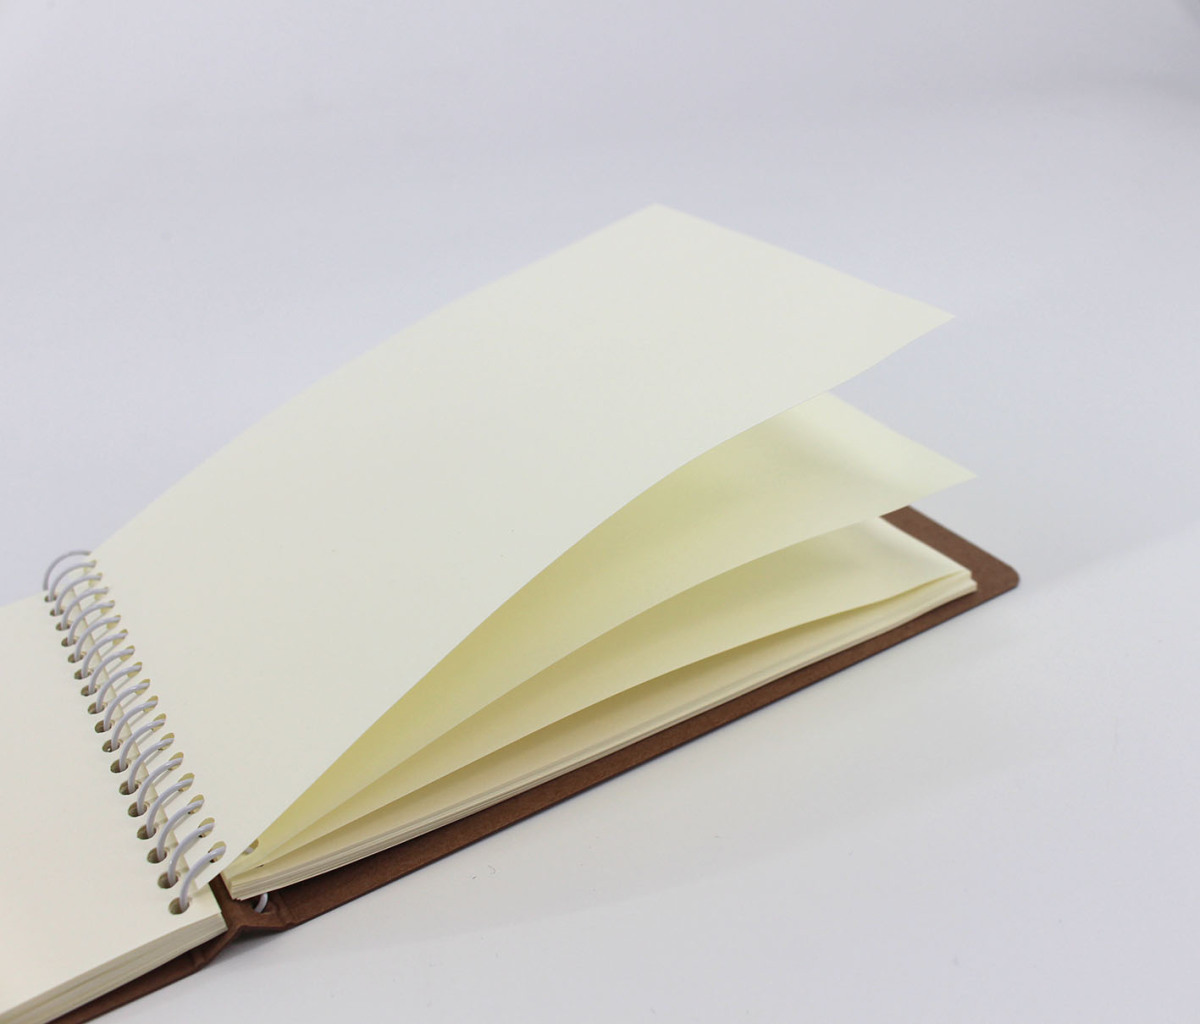  sketch book CRM-A6 Brown 50 sheets insertion my sketch Brown A6 size Orion 